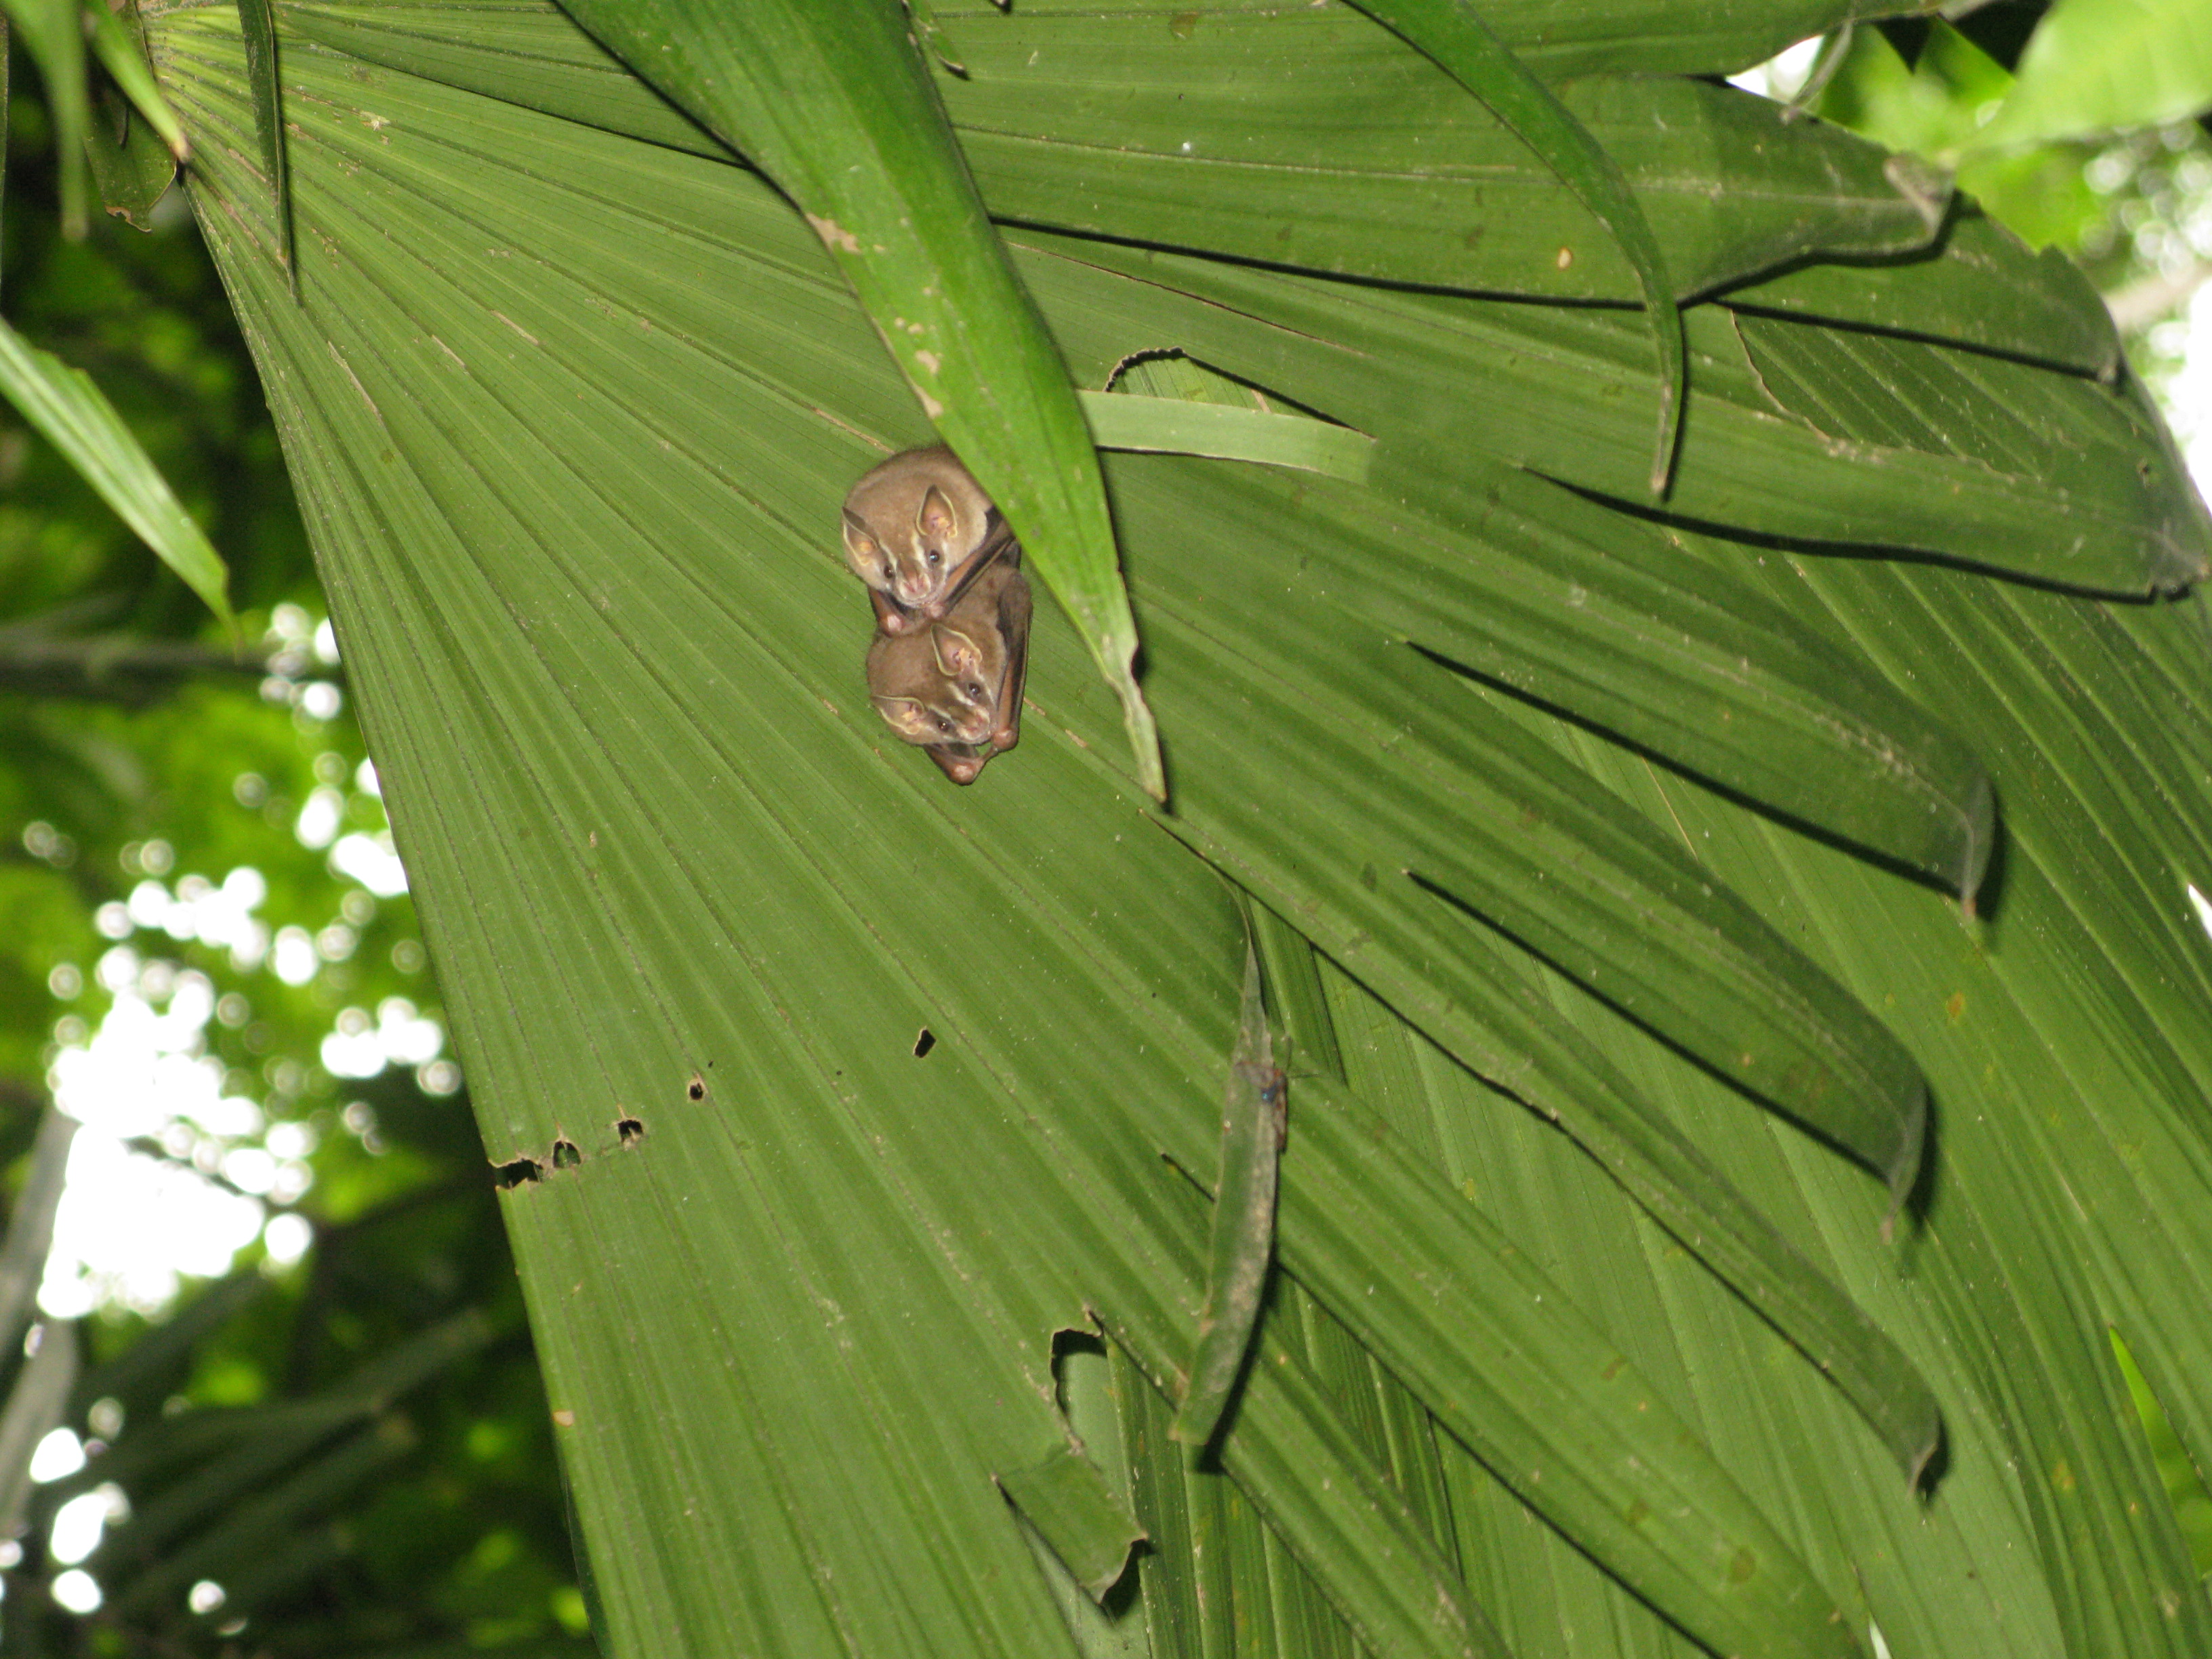 These cute little bats are so small and lightweight that a big palm leaf is all the shelter they need.